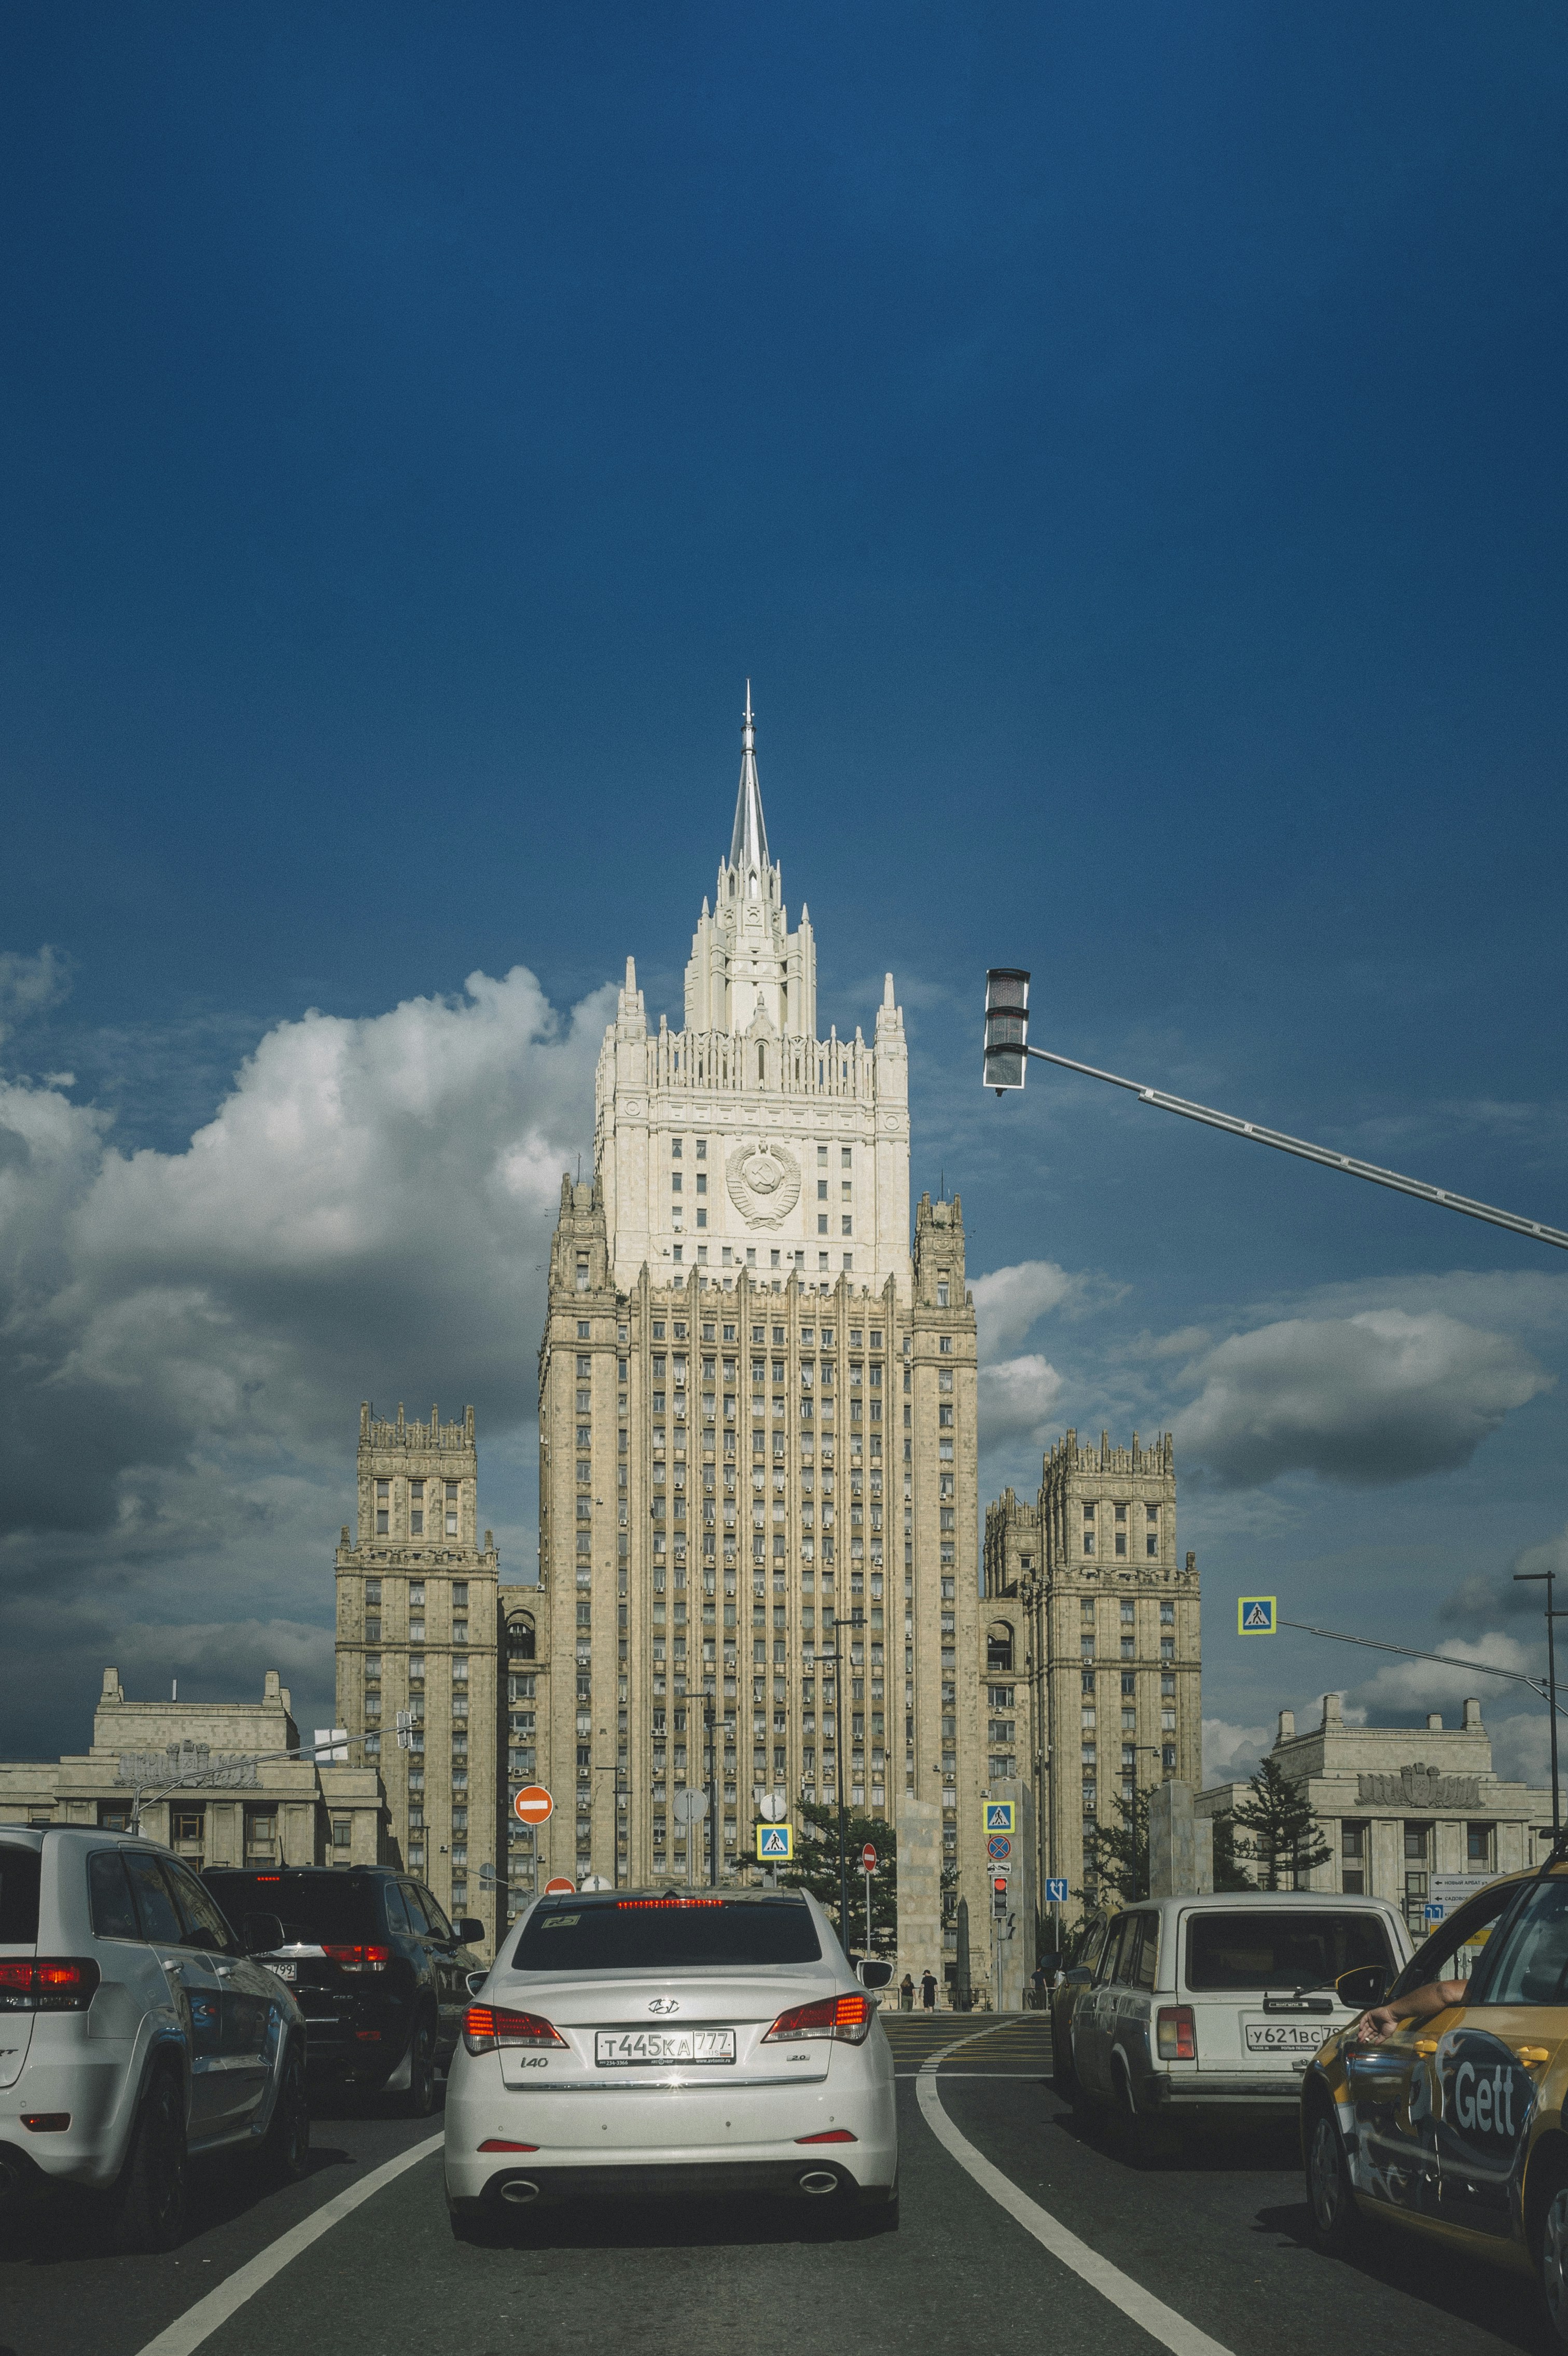 Stalin skyscraper — building The Ministry of Foreign Affairs of the Russian Federation in Moscow.